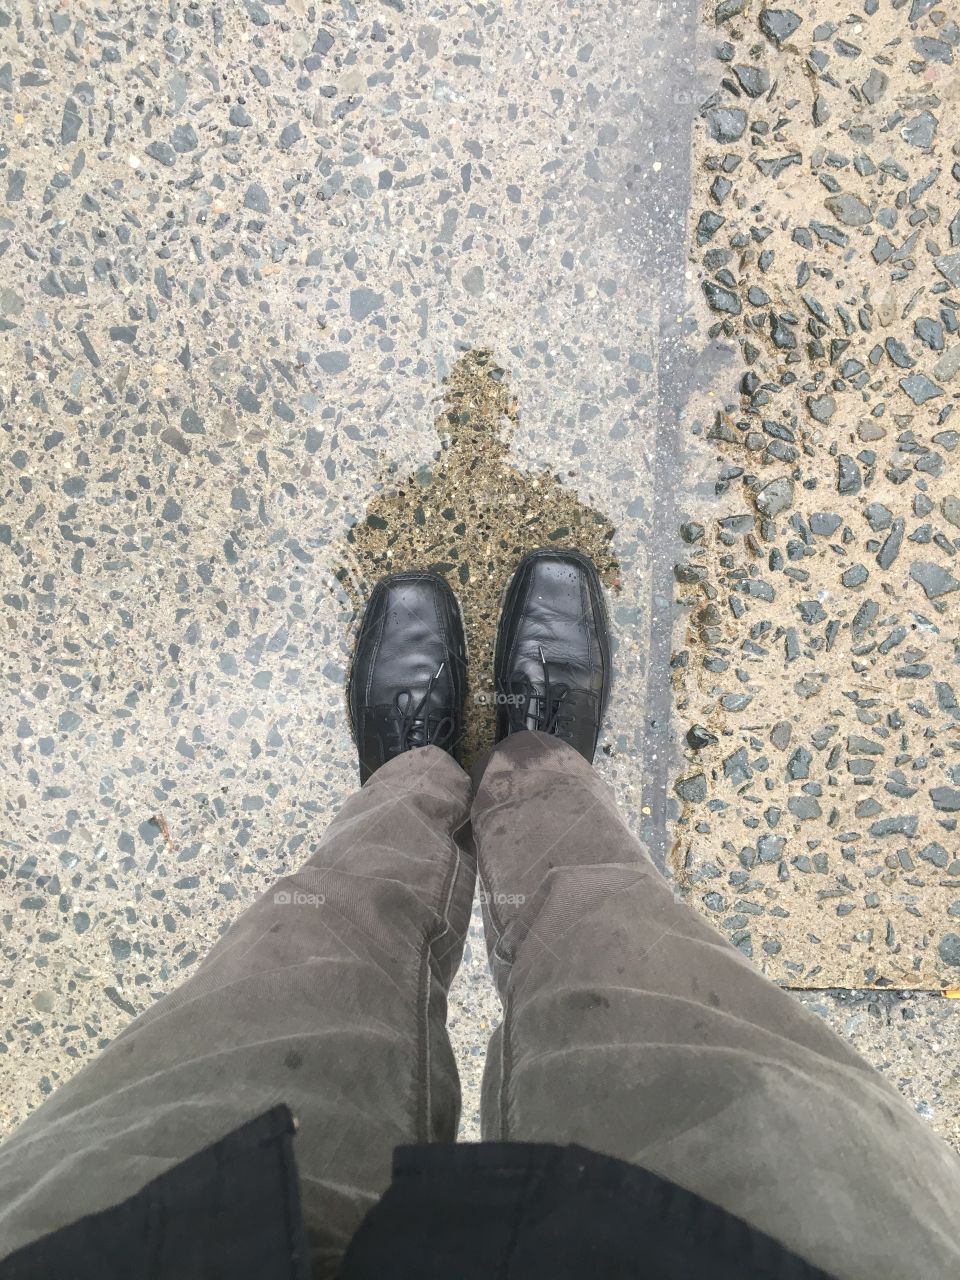 Standing in a puddle on a rainy day
A reflection of youth that has faded away
My shoes may be larger
And life may be harder
But I'm never too old to play